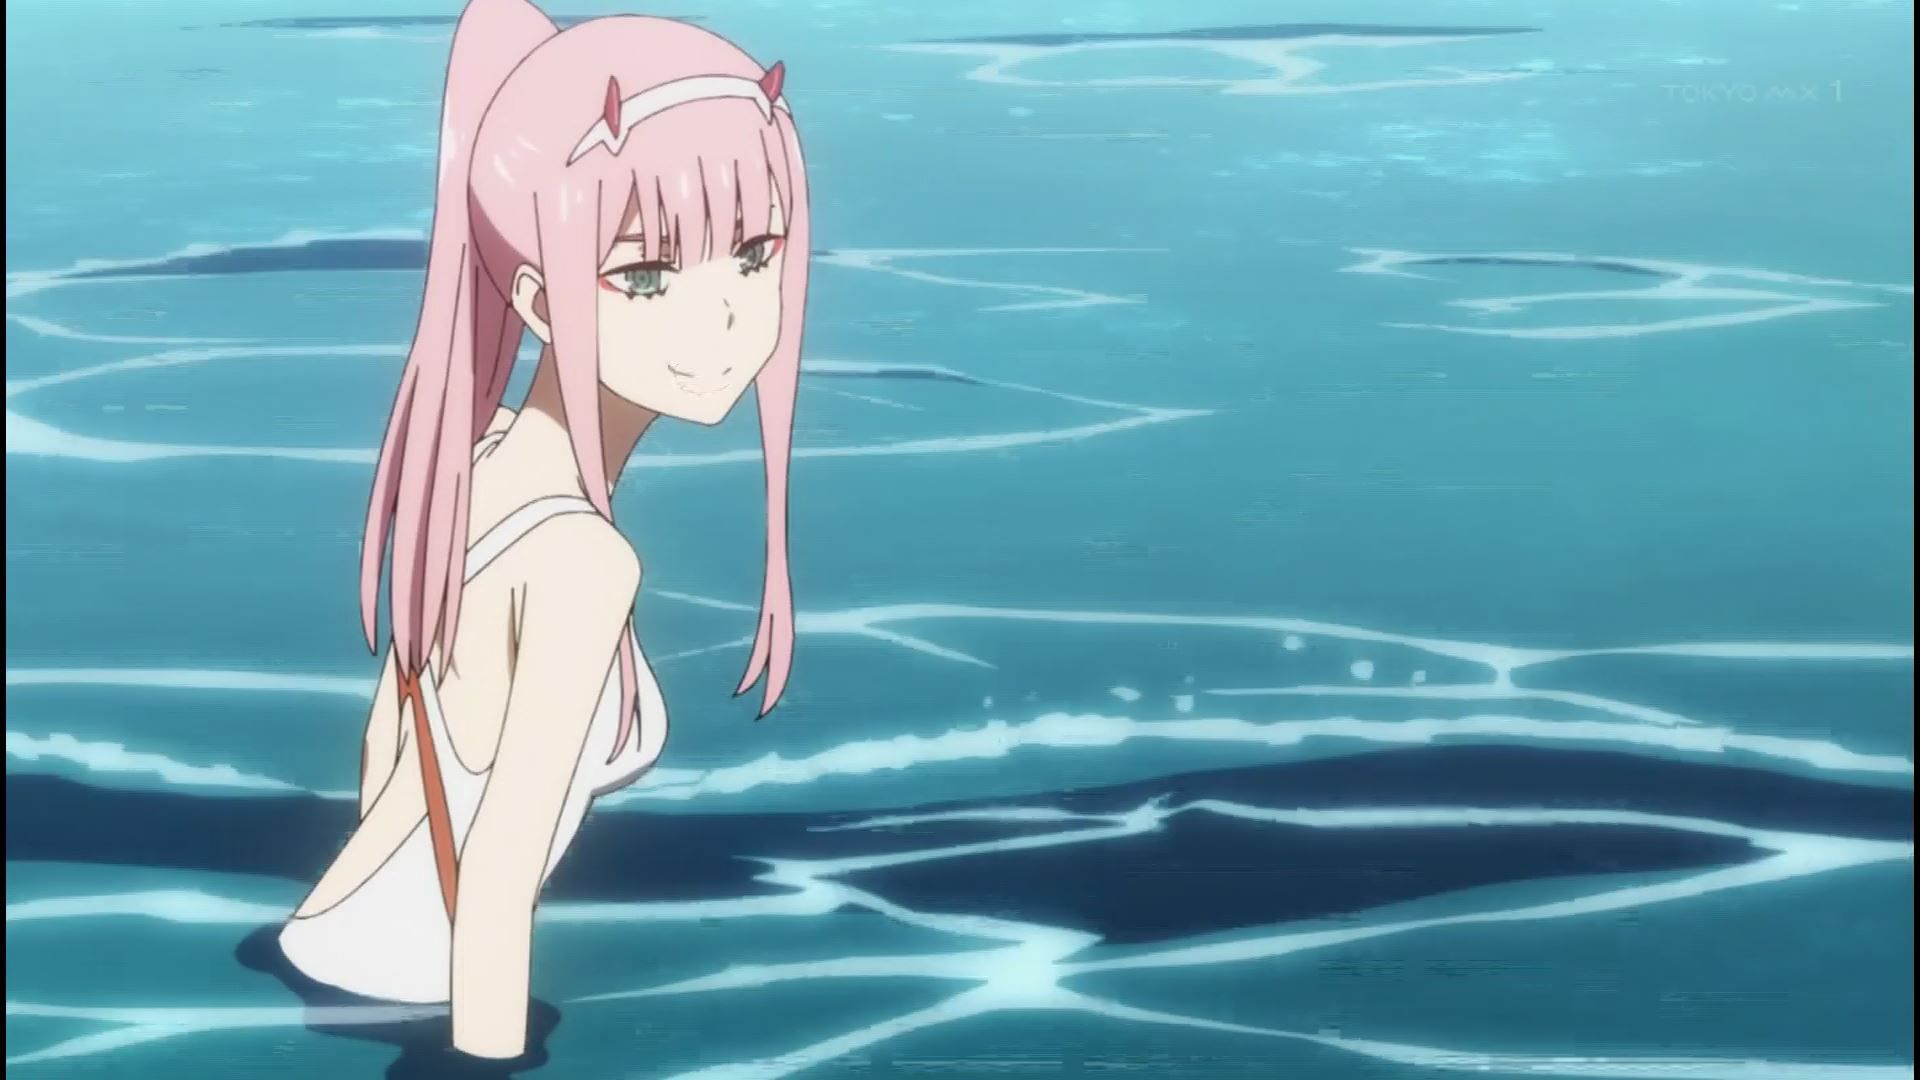 Anime [Darling in the franc kiss] seven girls erotic breasts and buttocks swimsuit times in the story! 4